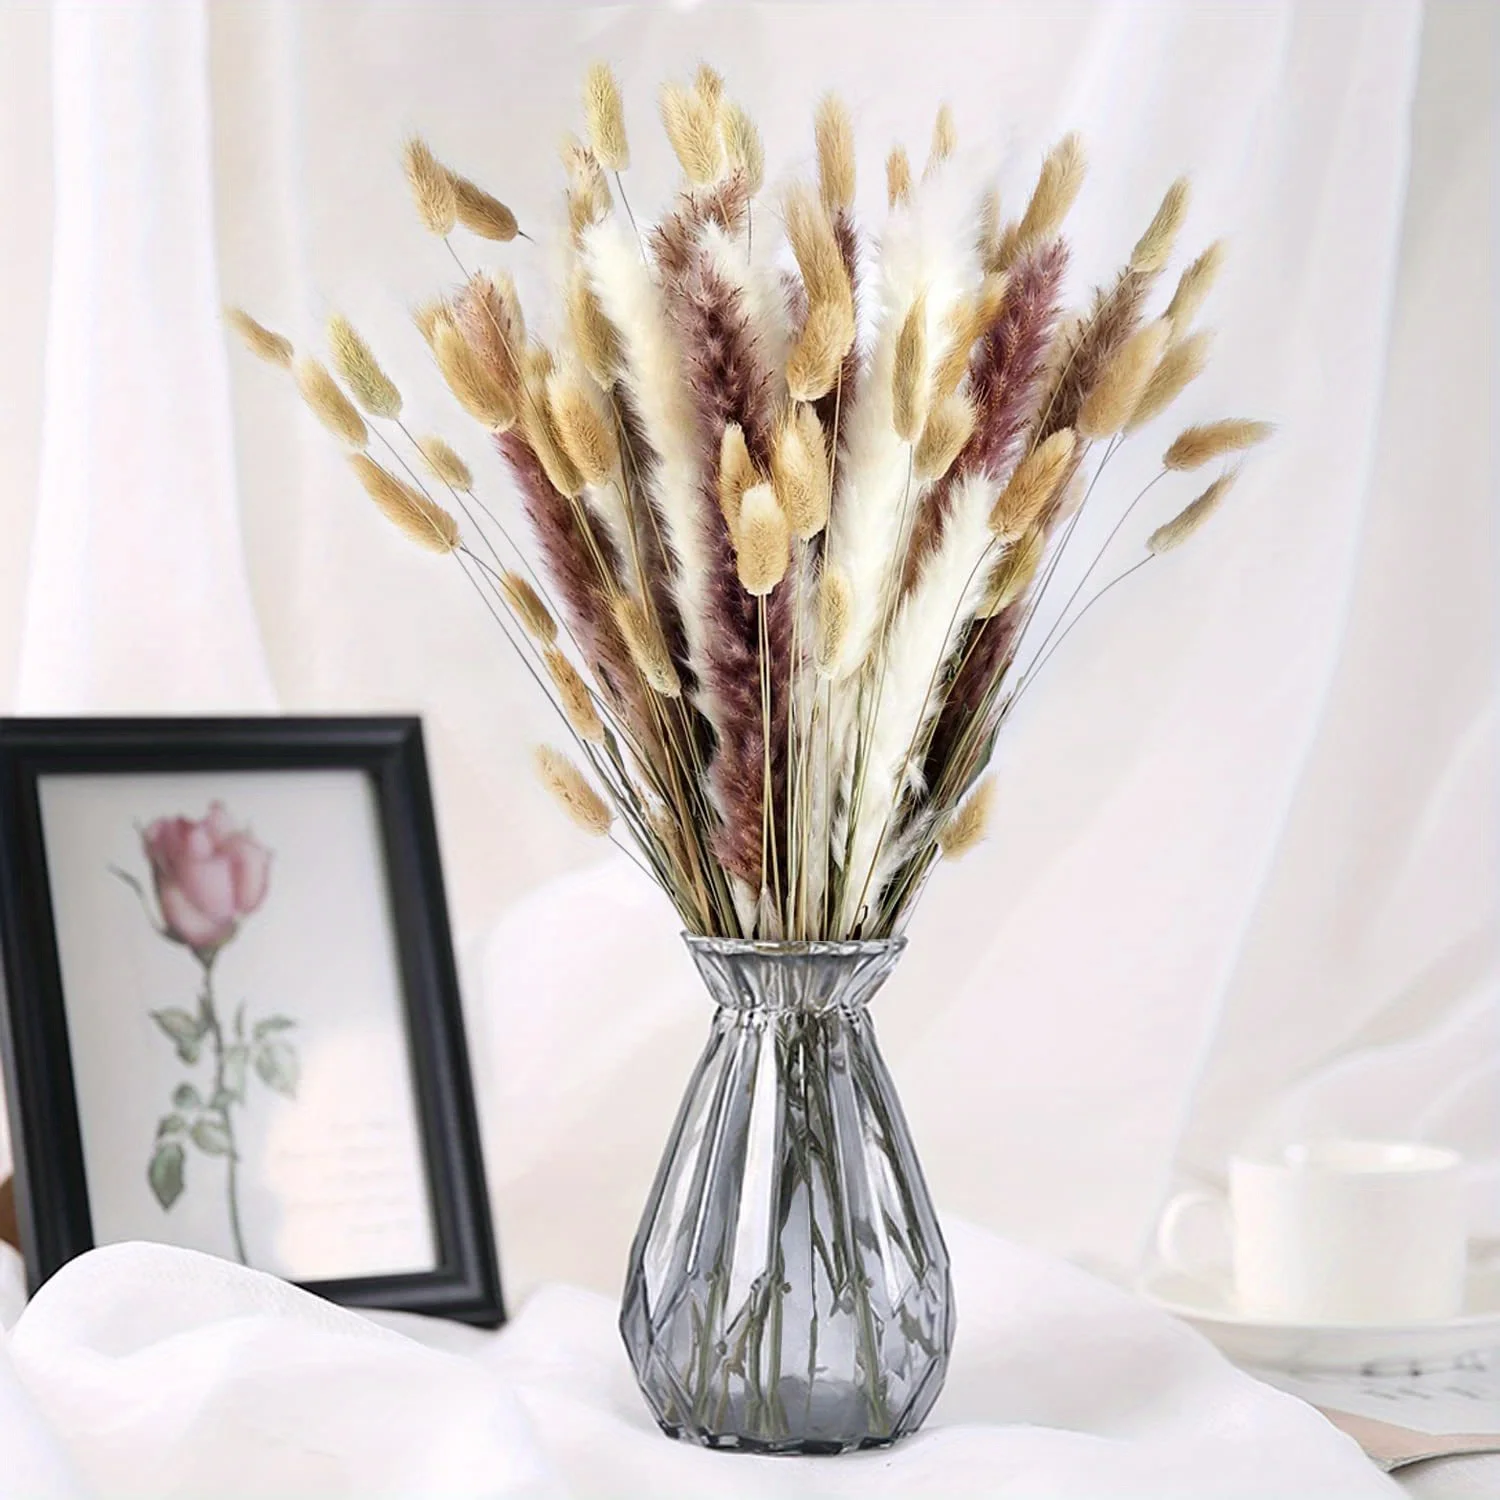 

Dried Flower Nature Fluffy Pampas Grass Wedding Party Decoration Bunny Rabbit Tail Reeds Artificial Flowers Christmas Home Decor